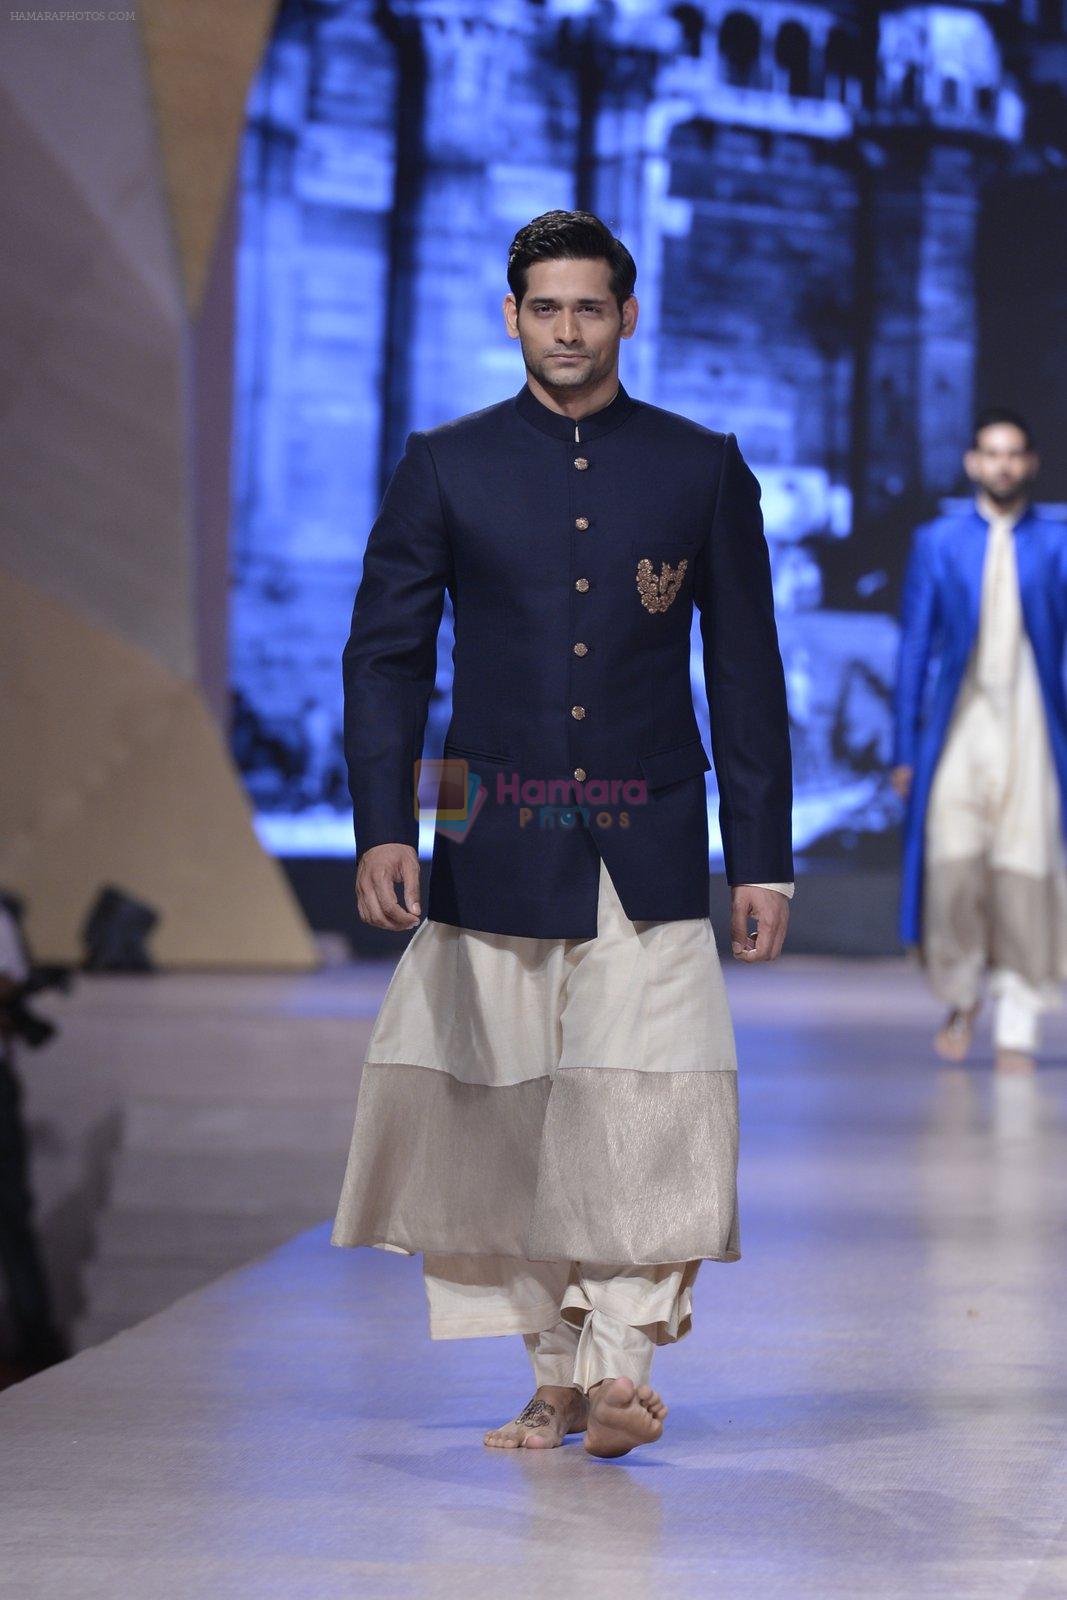 Model walk the ramp for Manish Malhotra's show at CPAA Fevicol SHOW on 20th March 2016